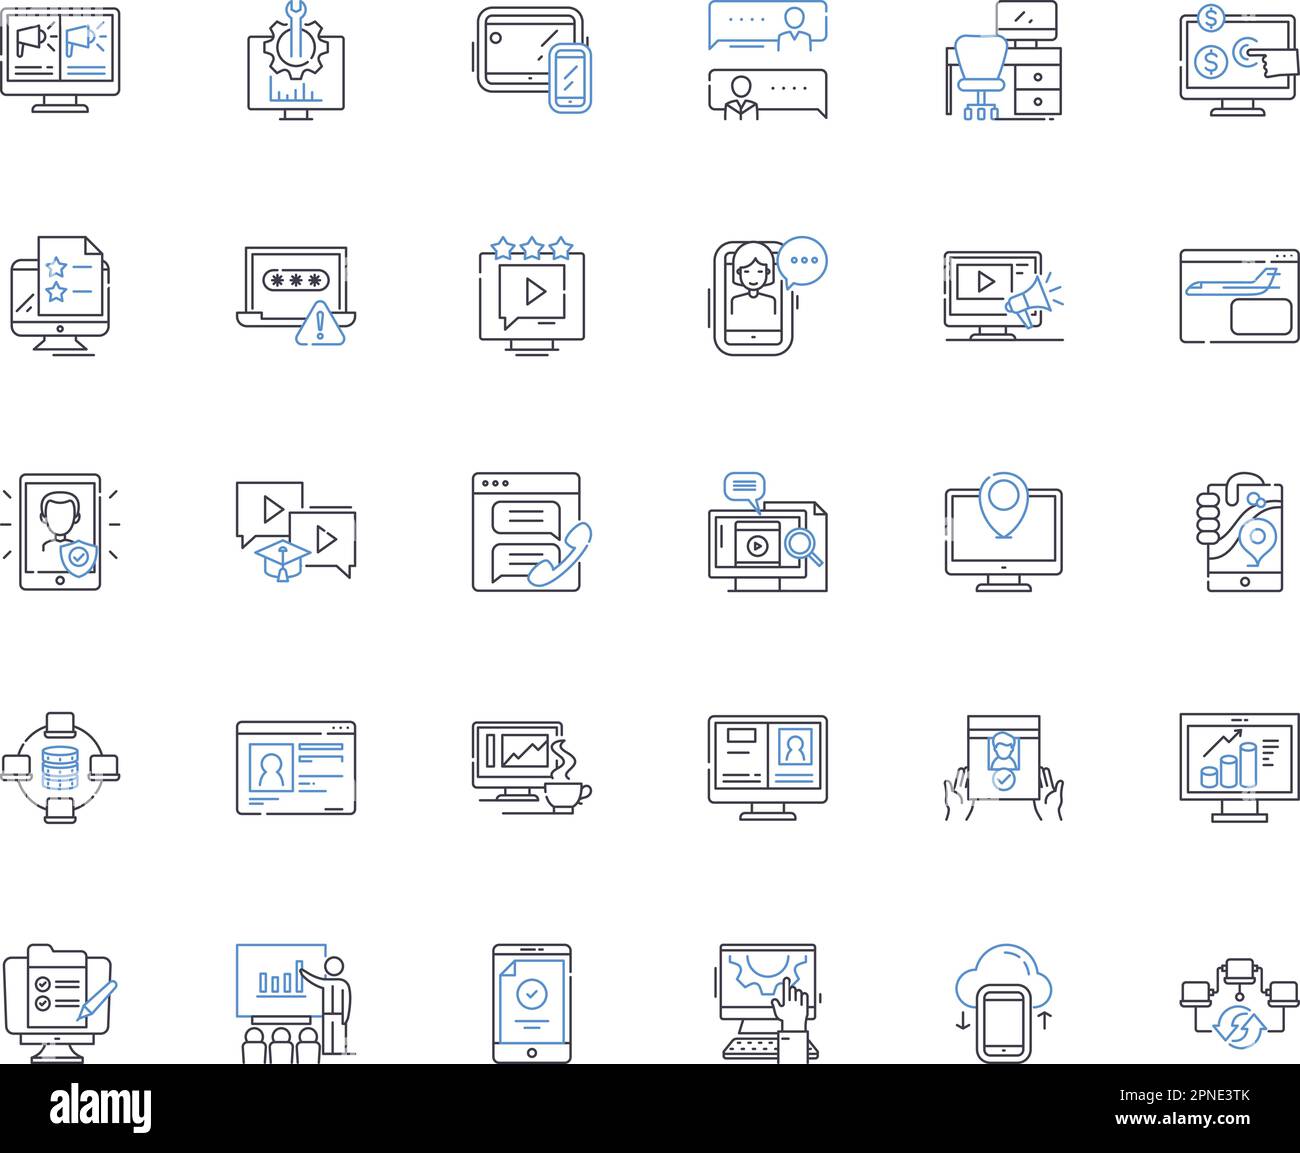 Machinenery line icons collection. Automation, Engine, Parts ...